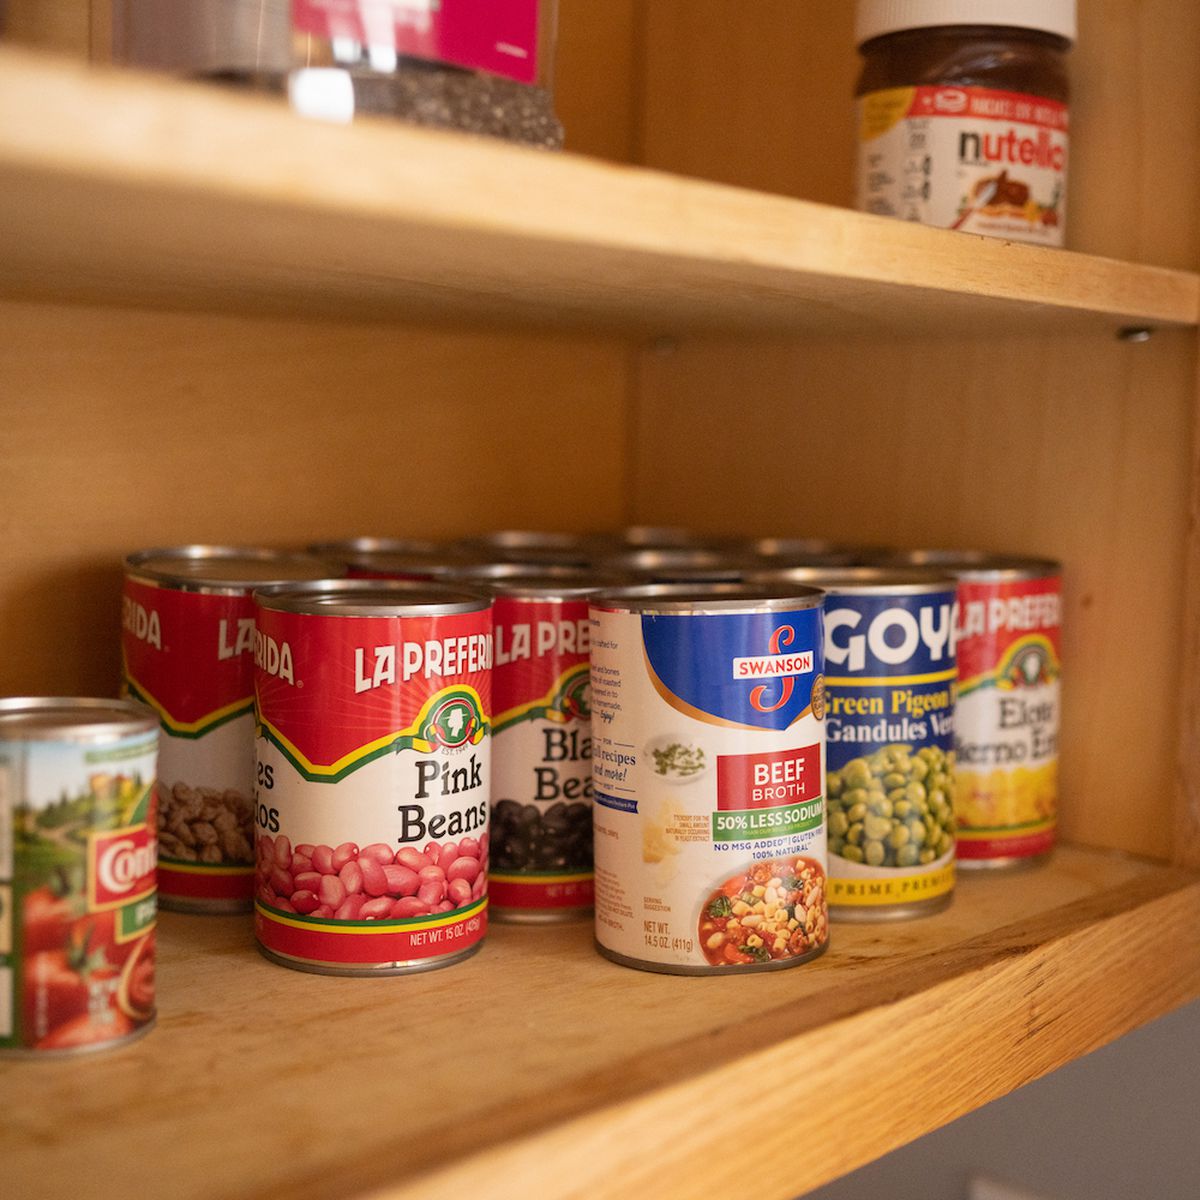 10 Brilliant Canned Food Storage Ideas - Clean Eating with kids